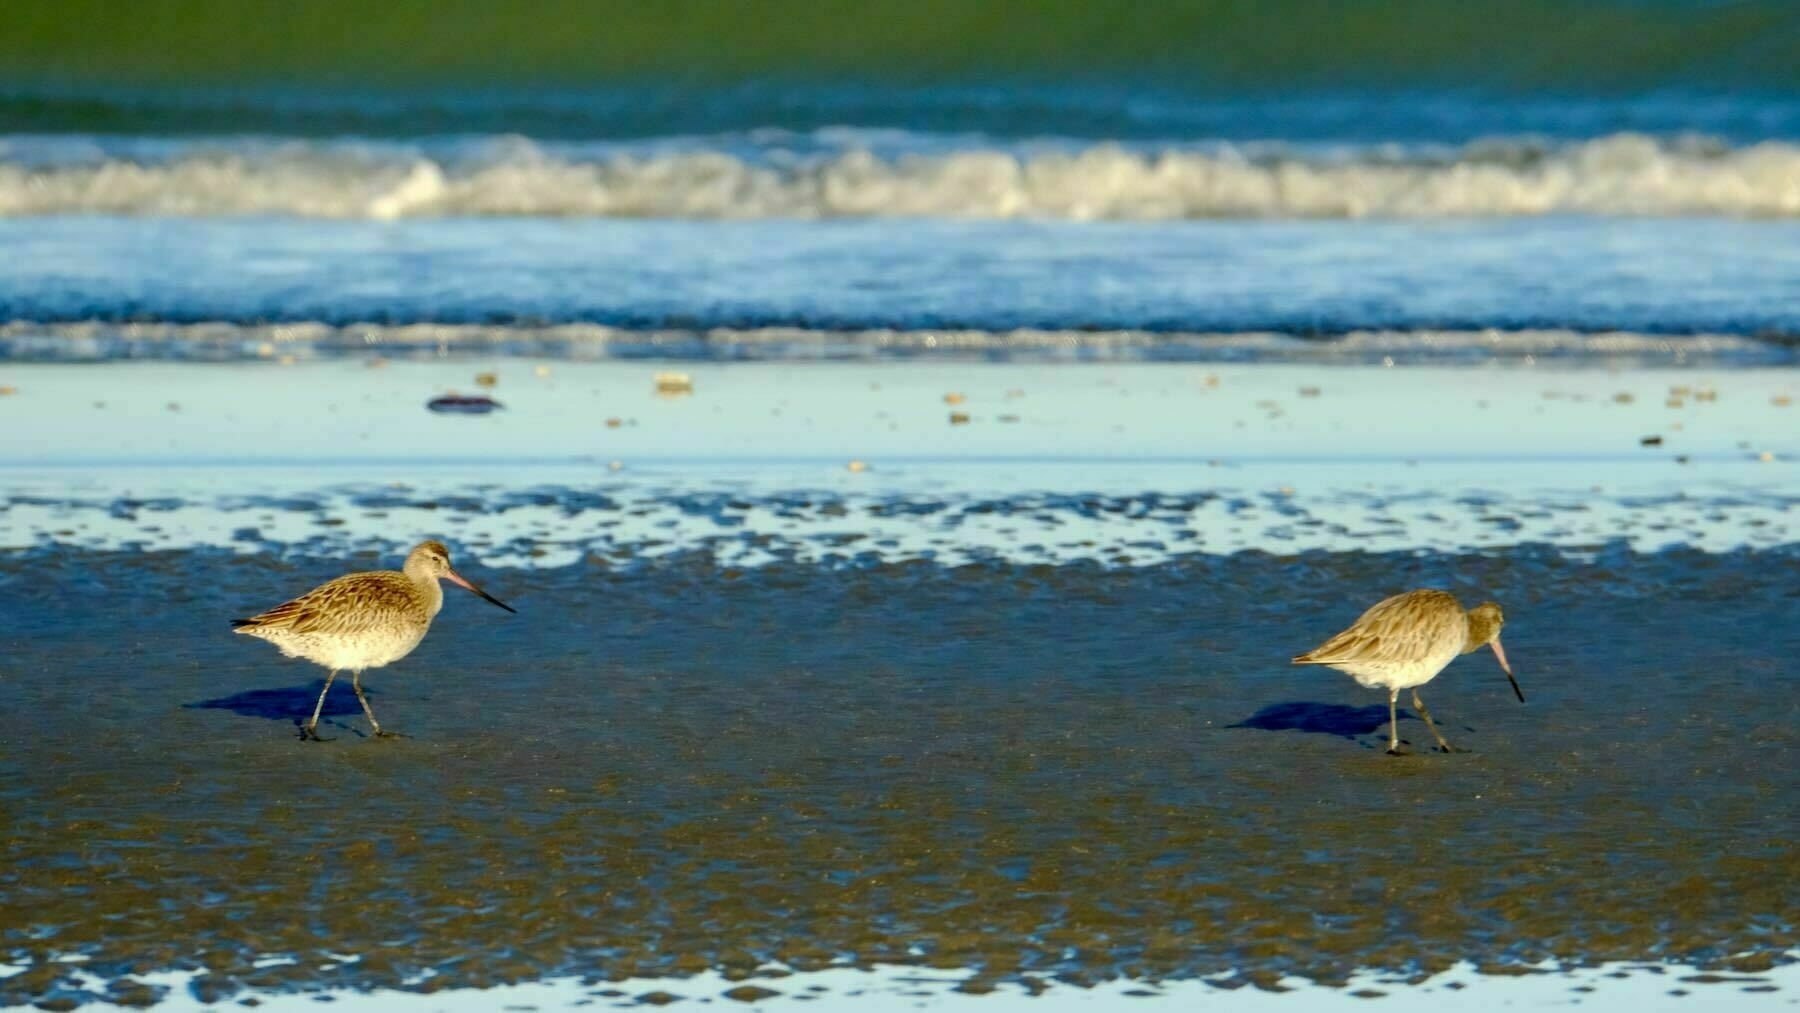 2 godwits on the wet sand at water's edge. 